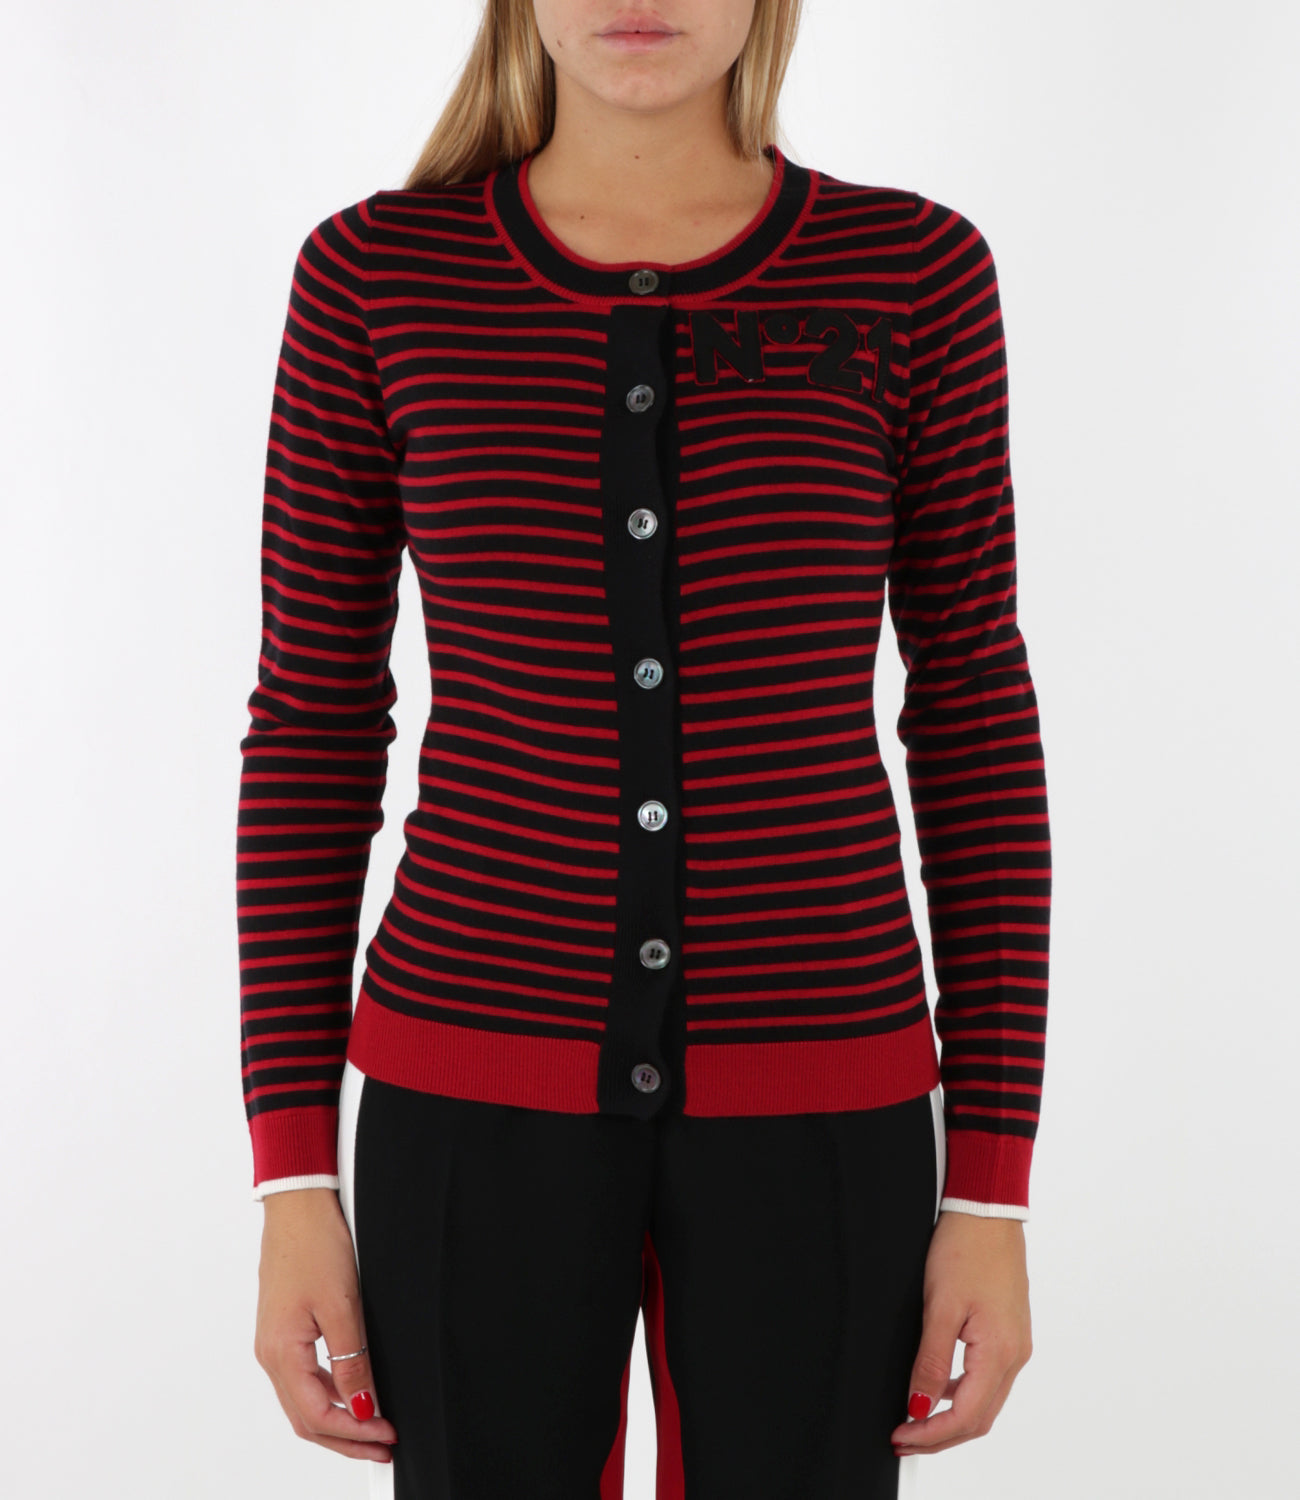 N 21 | Red and Black Cardigan